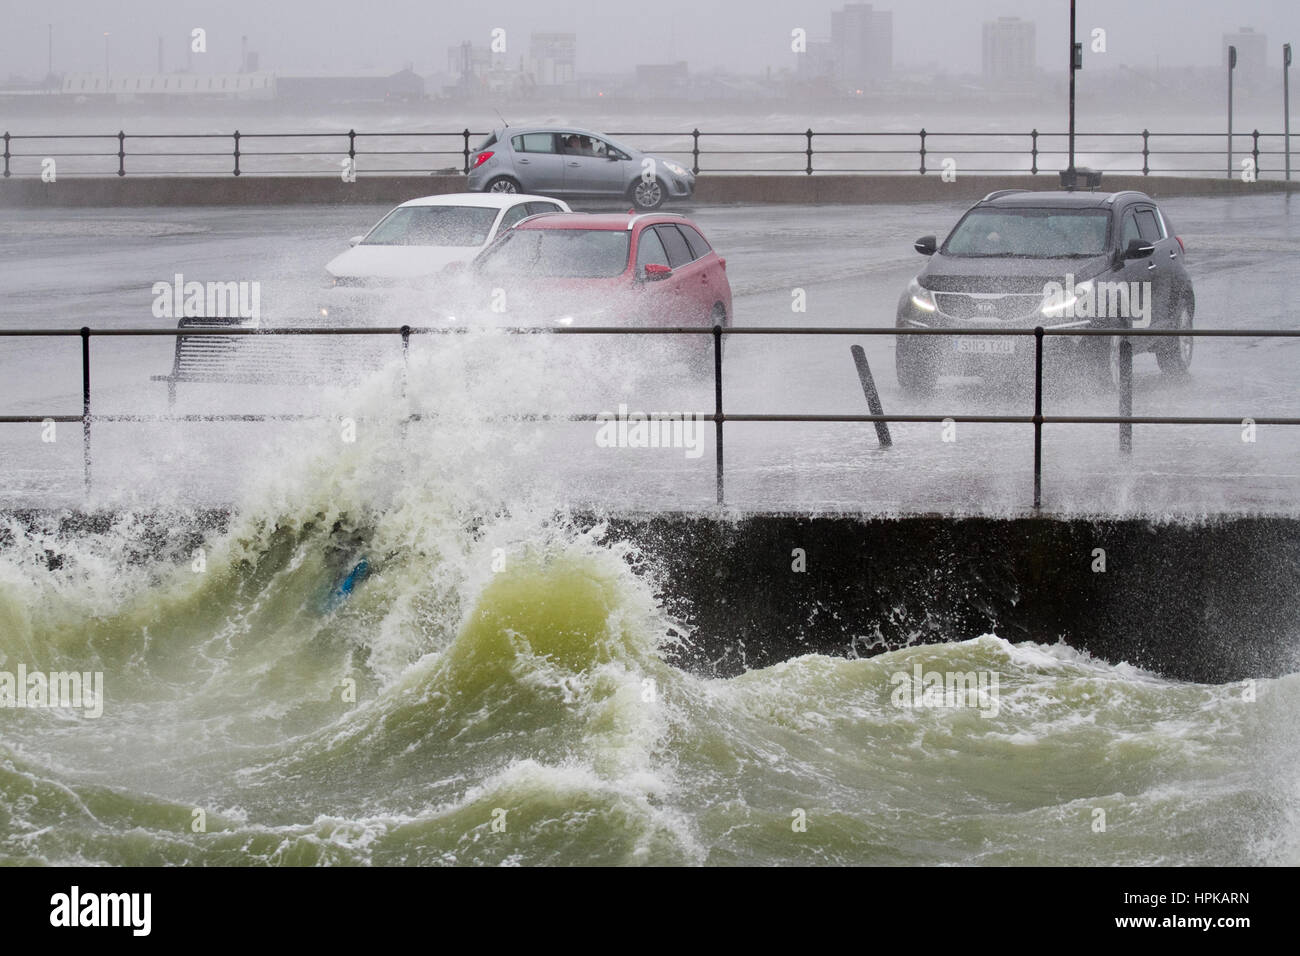 New Brighton, UK. Uk Weather.  Storm winds intensify as motorists queue for a free car wash. Even as the tide recedes the winds intensify as Storm Doris makes landfall.  The Green Marine Lake at New Brighton is whipped up to frenzy during the severe storm;  Warnings exist that the water could be unsafe and harmful to health.  Credit MediaWorldImages/AlamyLiveNews. Stock Photo